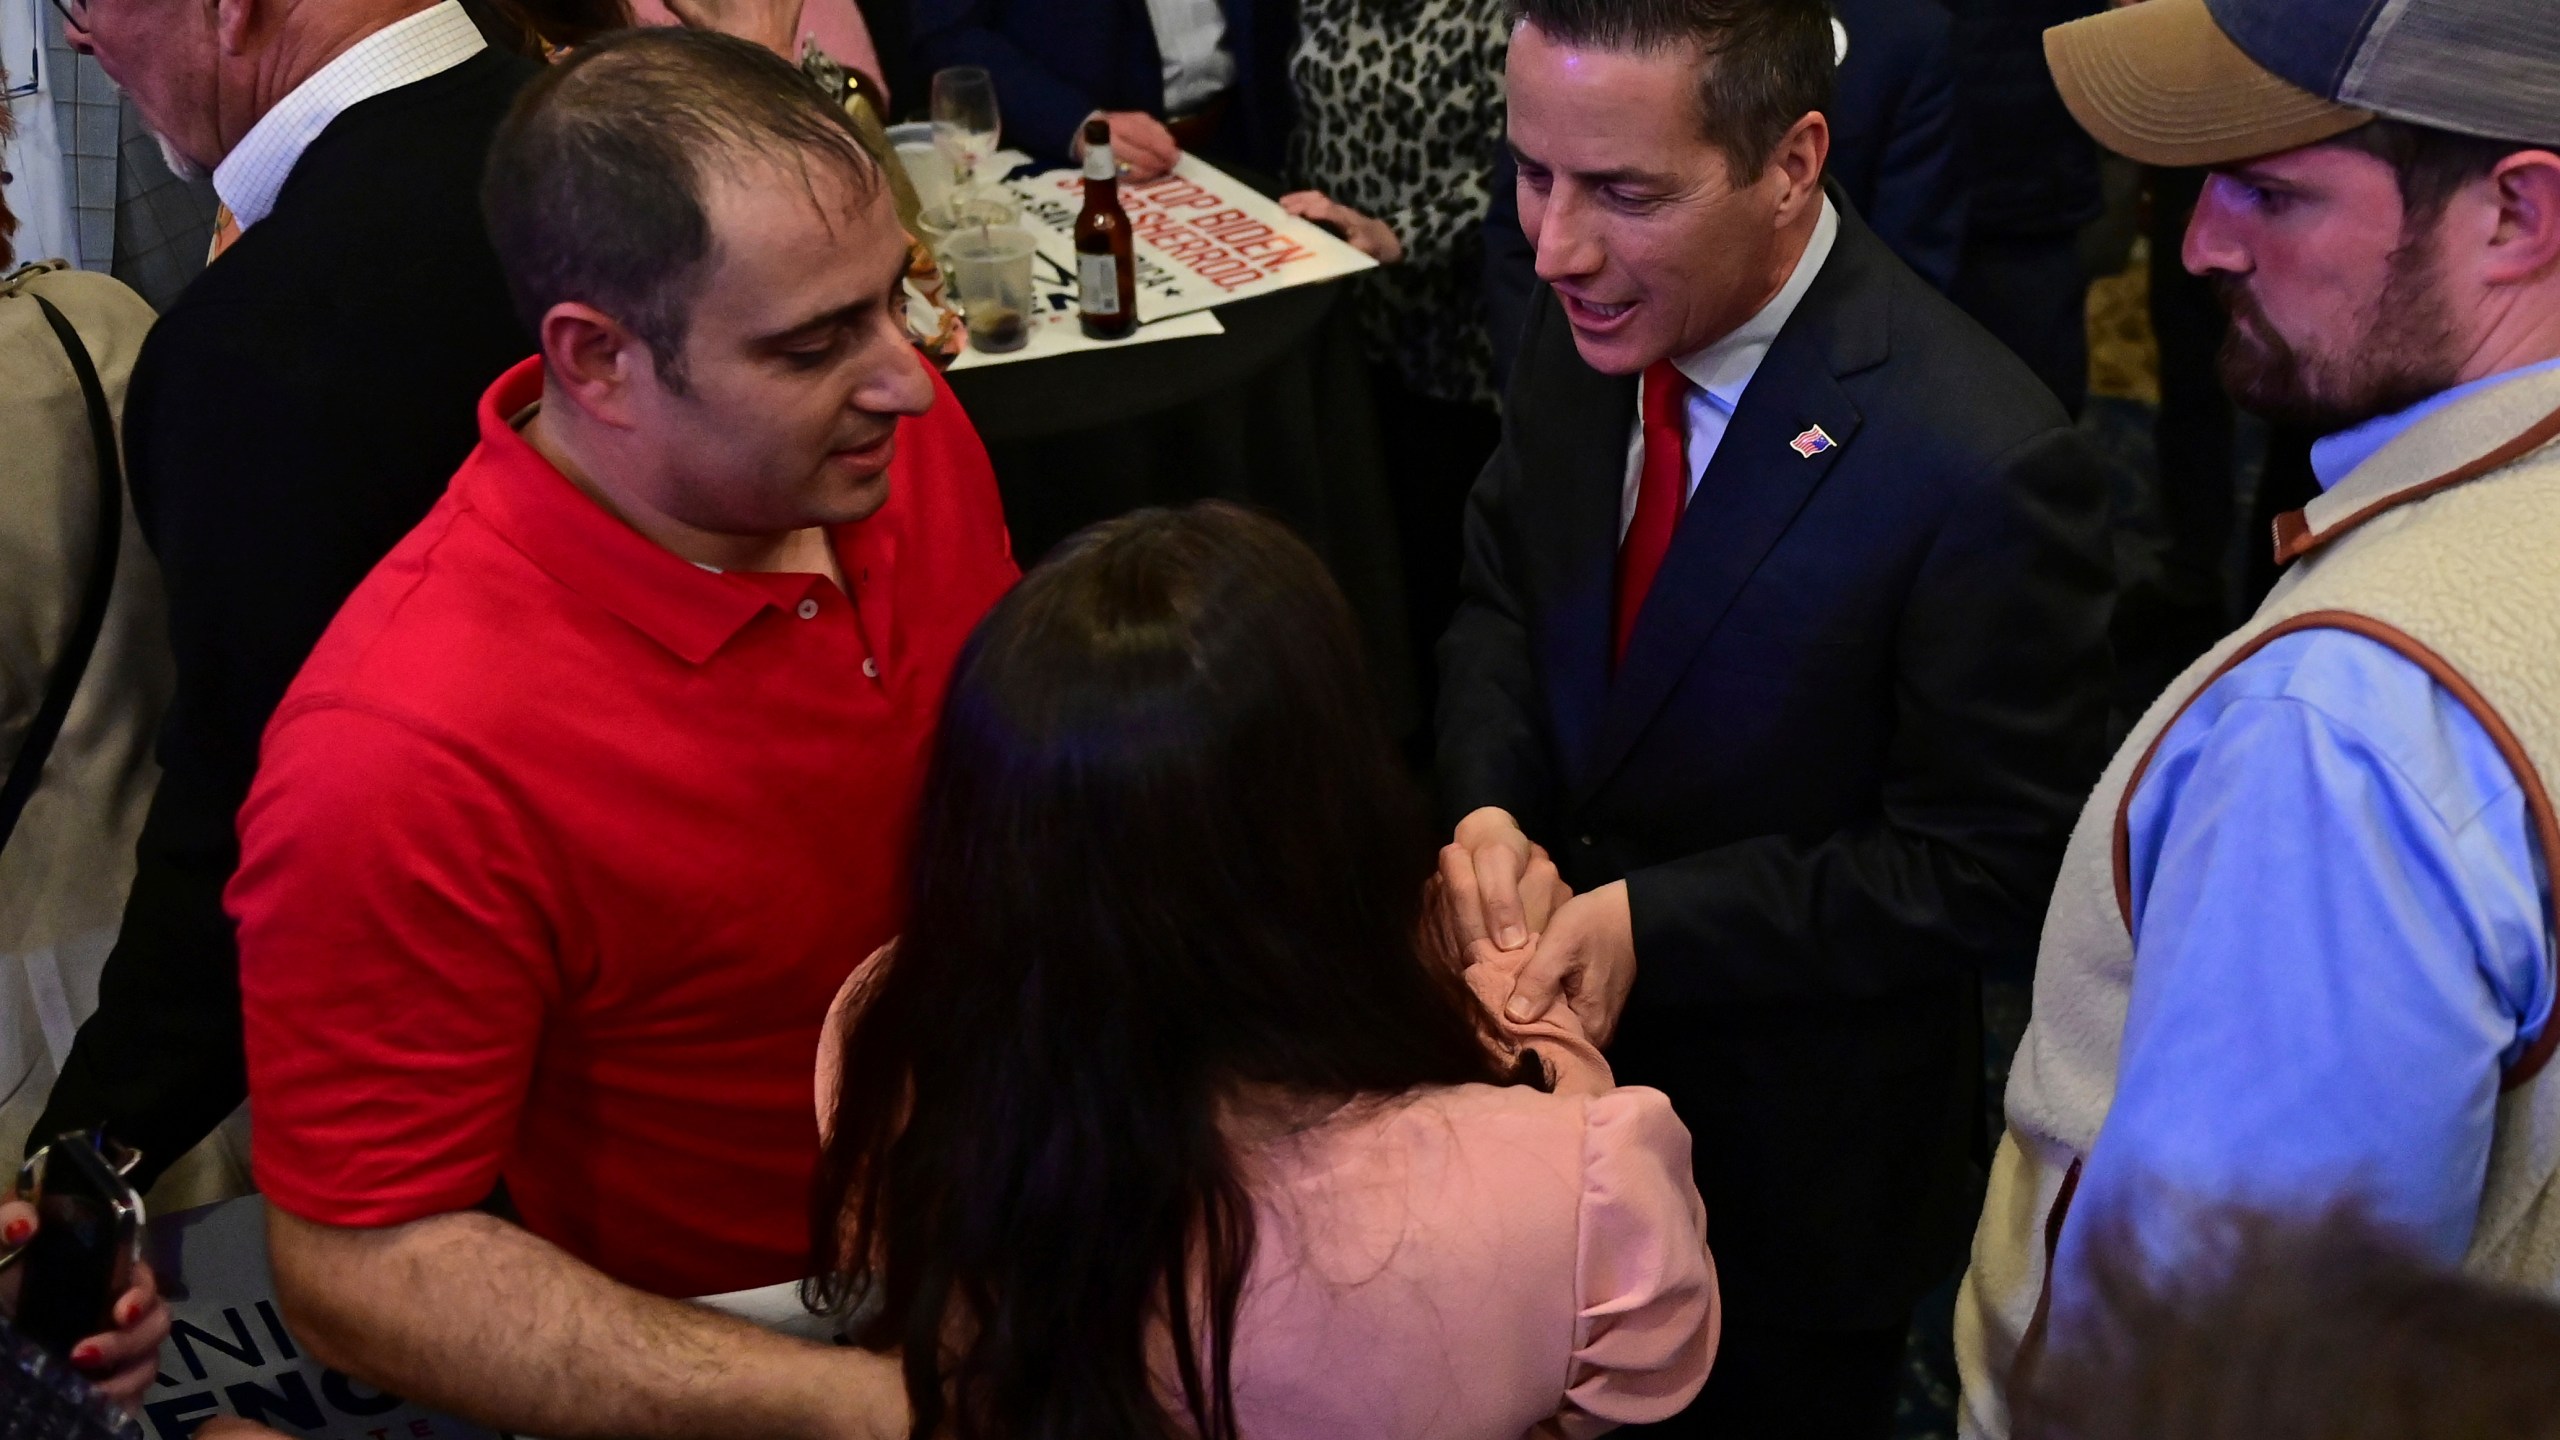 Cleveland businessman Bernie Moreno, a Republican candidate for U.S. Senate, shakes hands with a supporter during his primary election night watch party in Westlake, Ohio, Tuesday, March 19, 2024. (AP Photo/David Dermer)